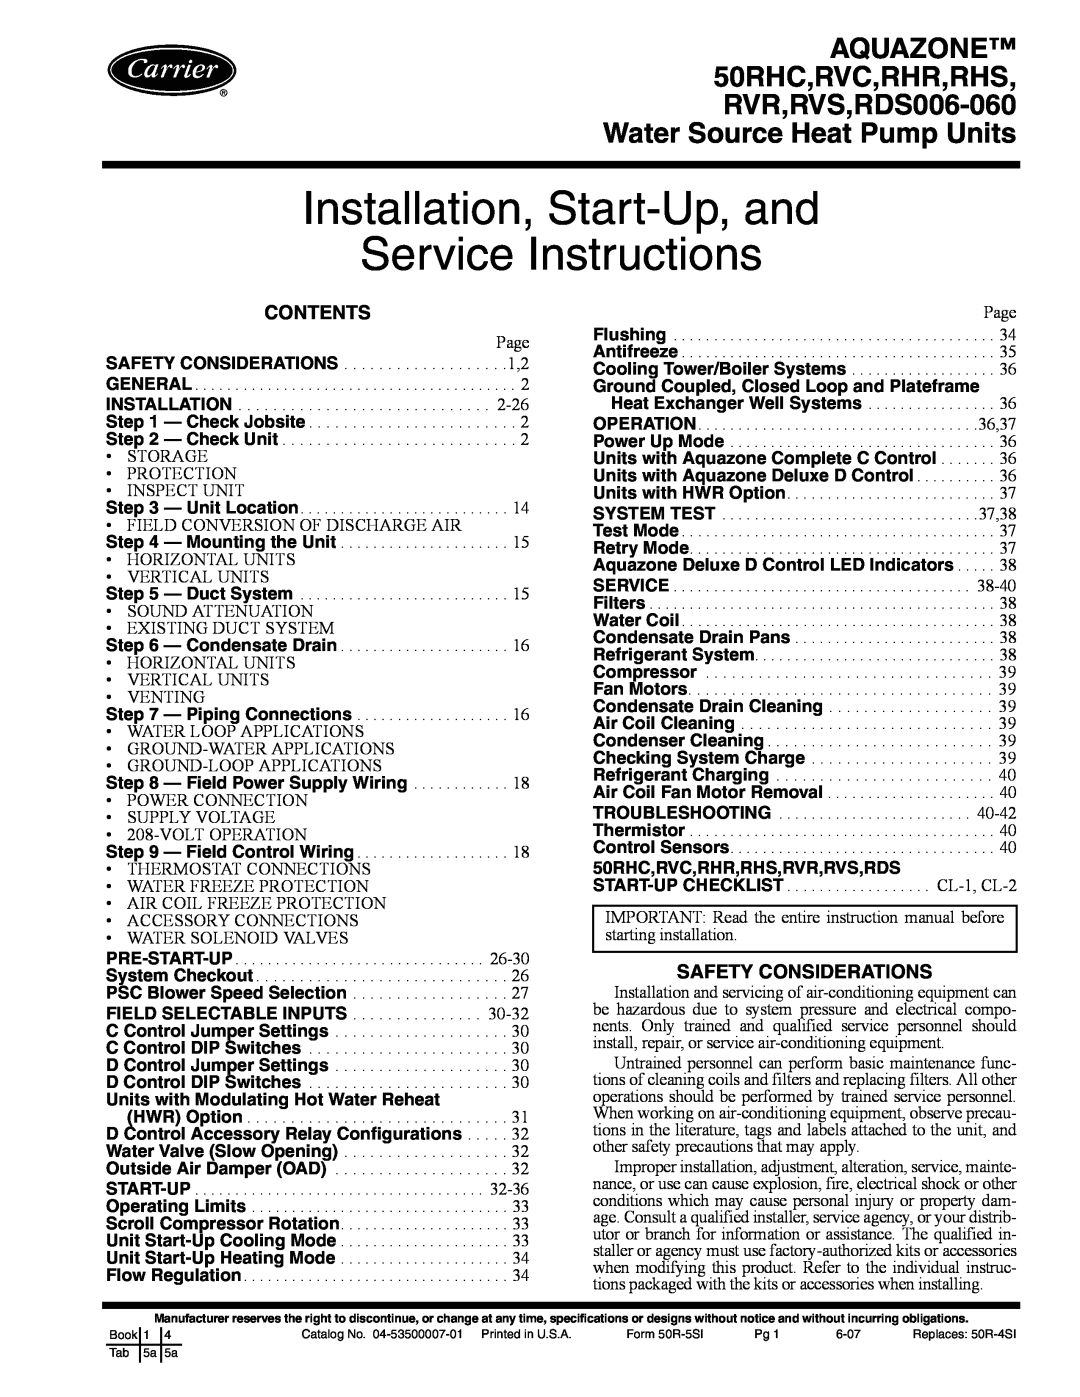 Carrier RDS006-060, RVS specifications Contents, Safety Considerations, Installation, Start-Up,and Service Instructions 